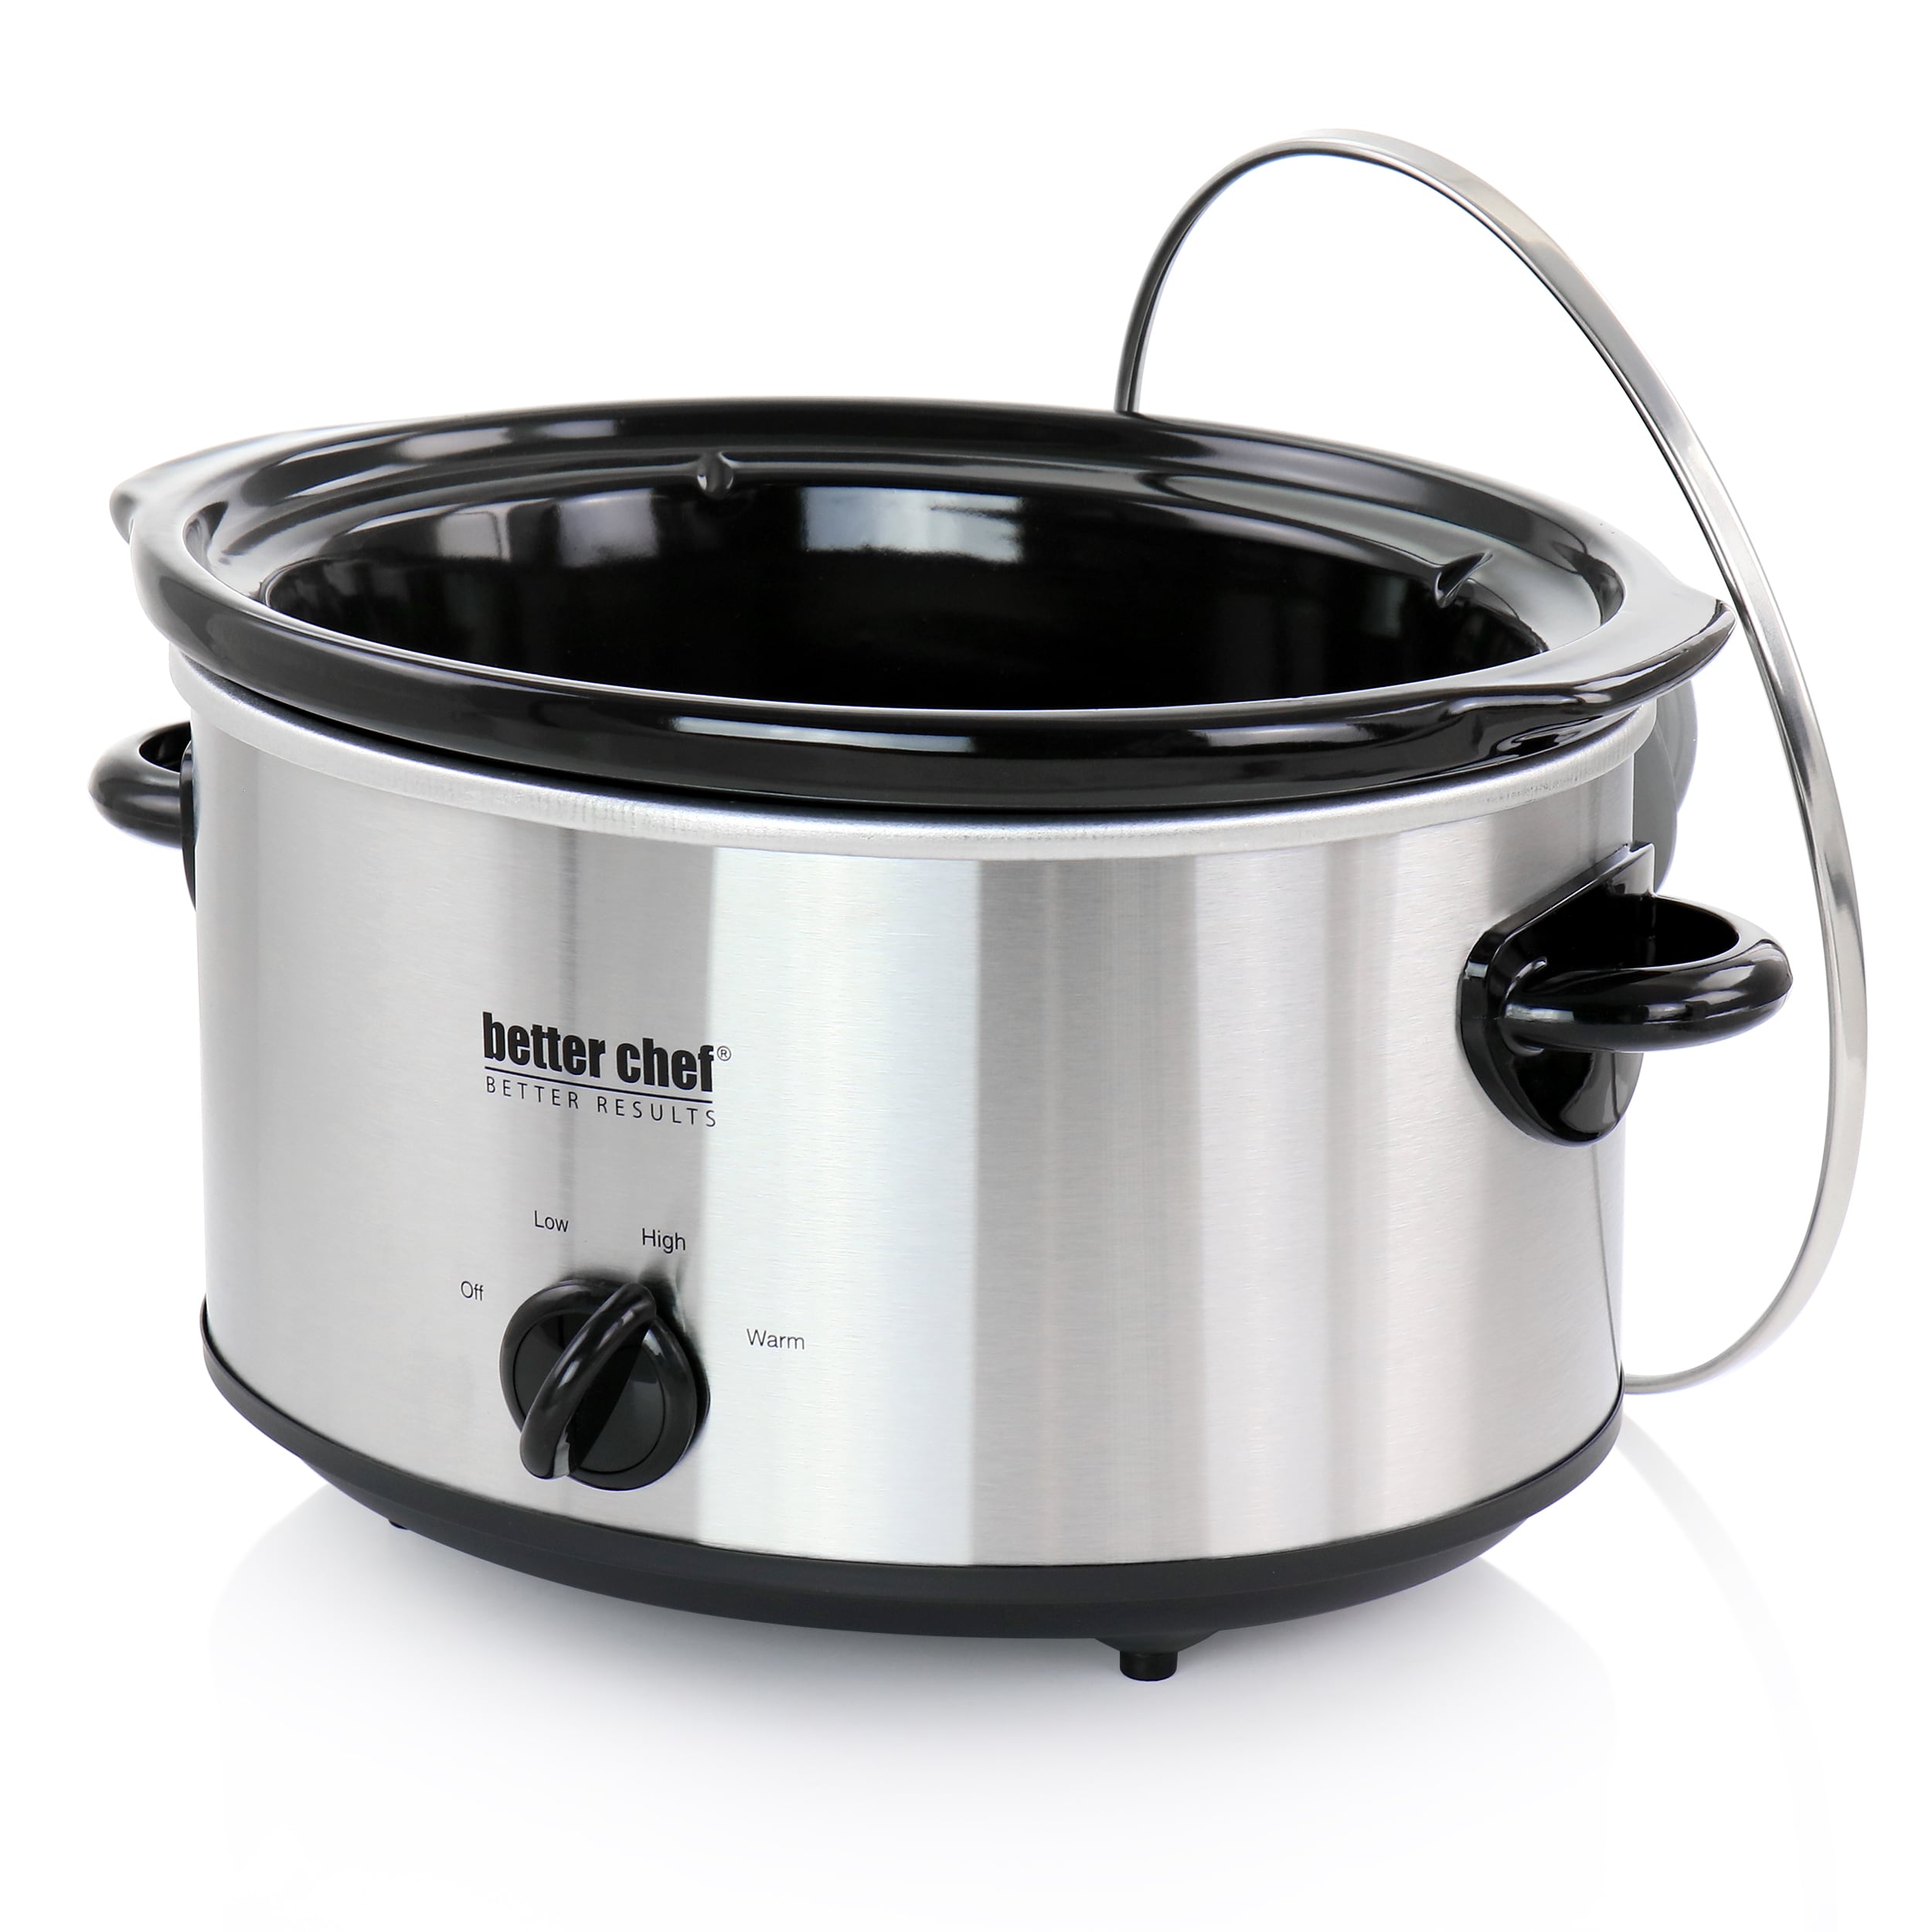 West Bend Large Slow Cooker with 3 Temperature Settings, 6 Qt. Capacity, in  Brushed Stainless Steel (87156)